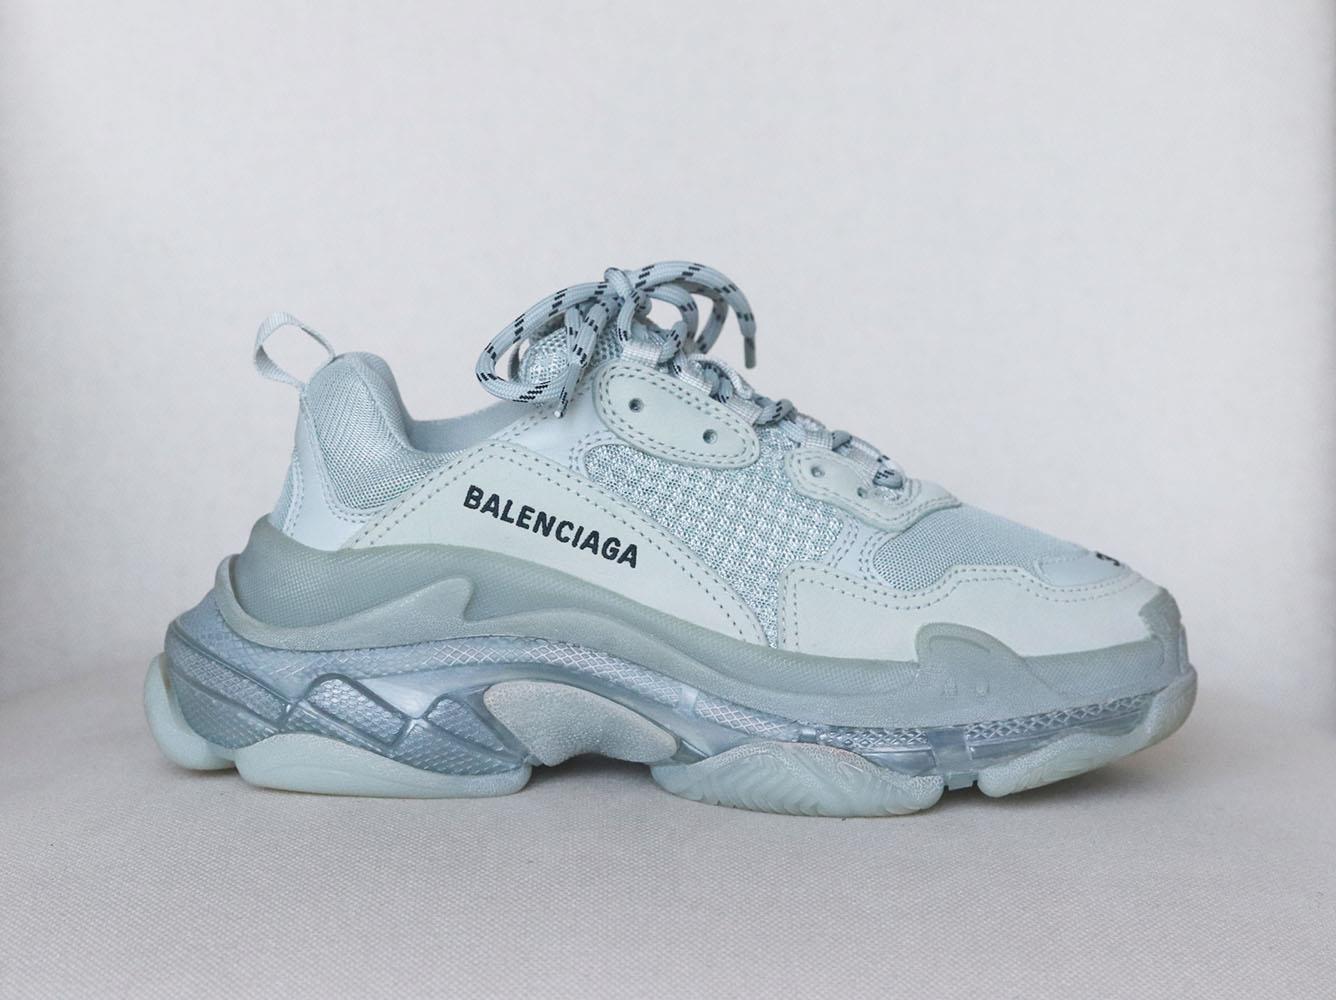 Balenciaga's coveted 'Triple S Clear Sole' design are the archetype of the season's 'dad sneaker' trend, so it's no surprise they're selling out so fast and this iteration is set on the signature triple-stacked sole and has panels of leather  for a